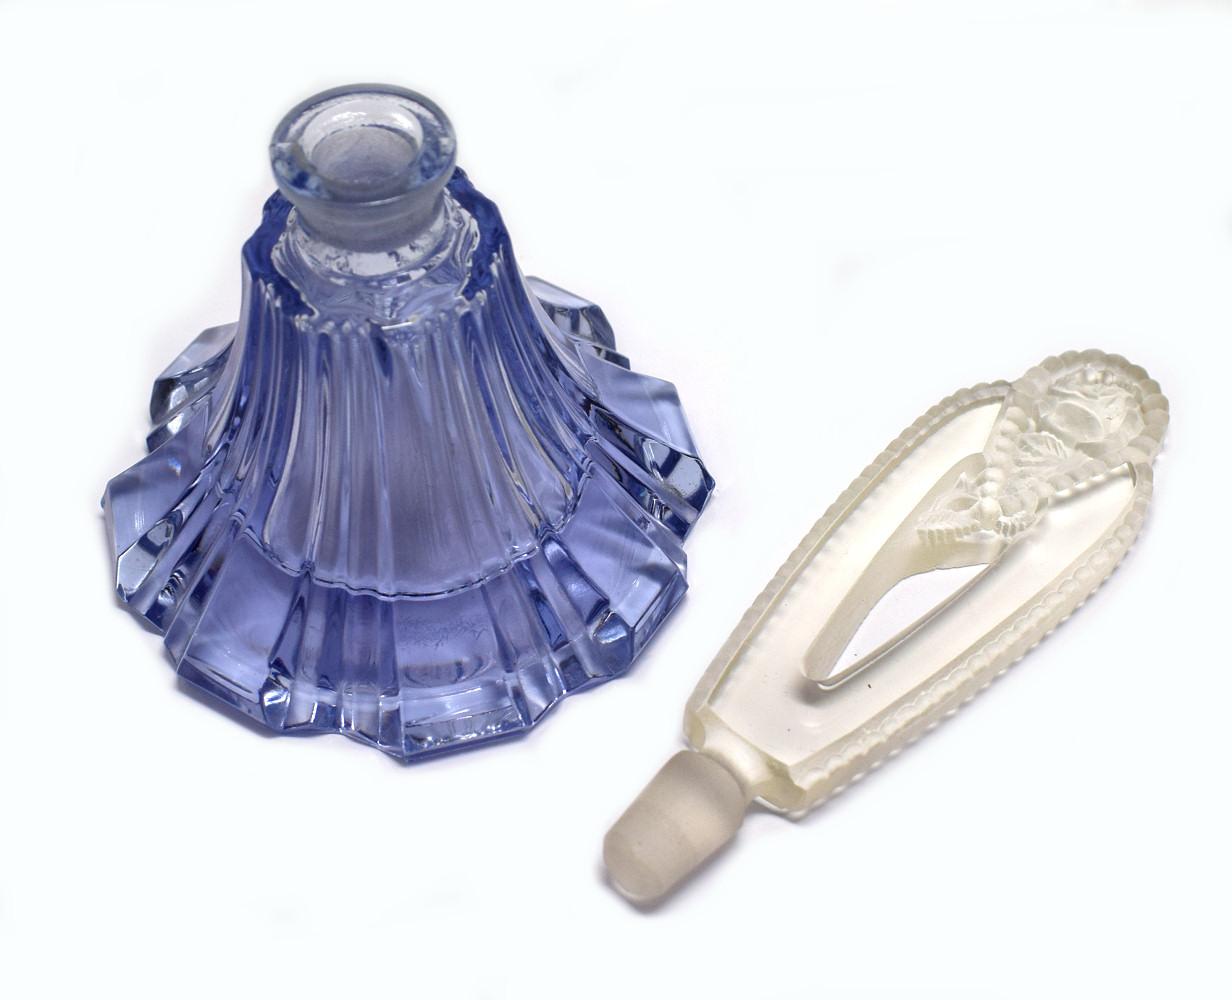 For your consideration is this stylish 1930s Art Deco blue and clear glass perfume bottle. Lovely item with no damage, just minor signs of use. The stopper has an embossed rose in relief and snugly fits into the base which flares out at the base.